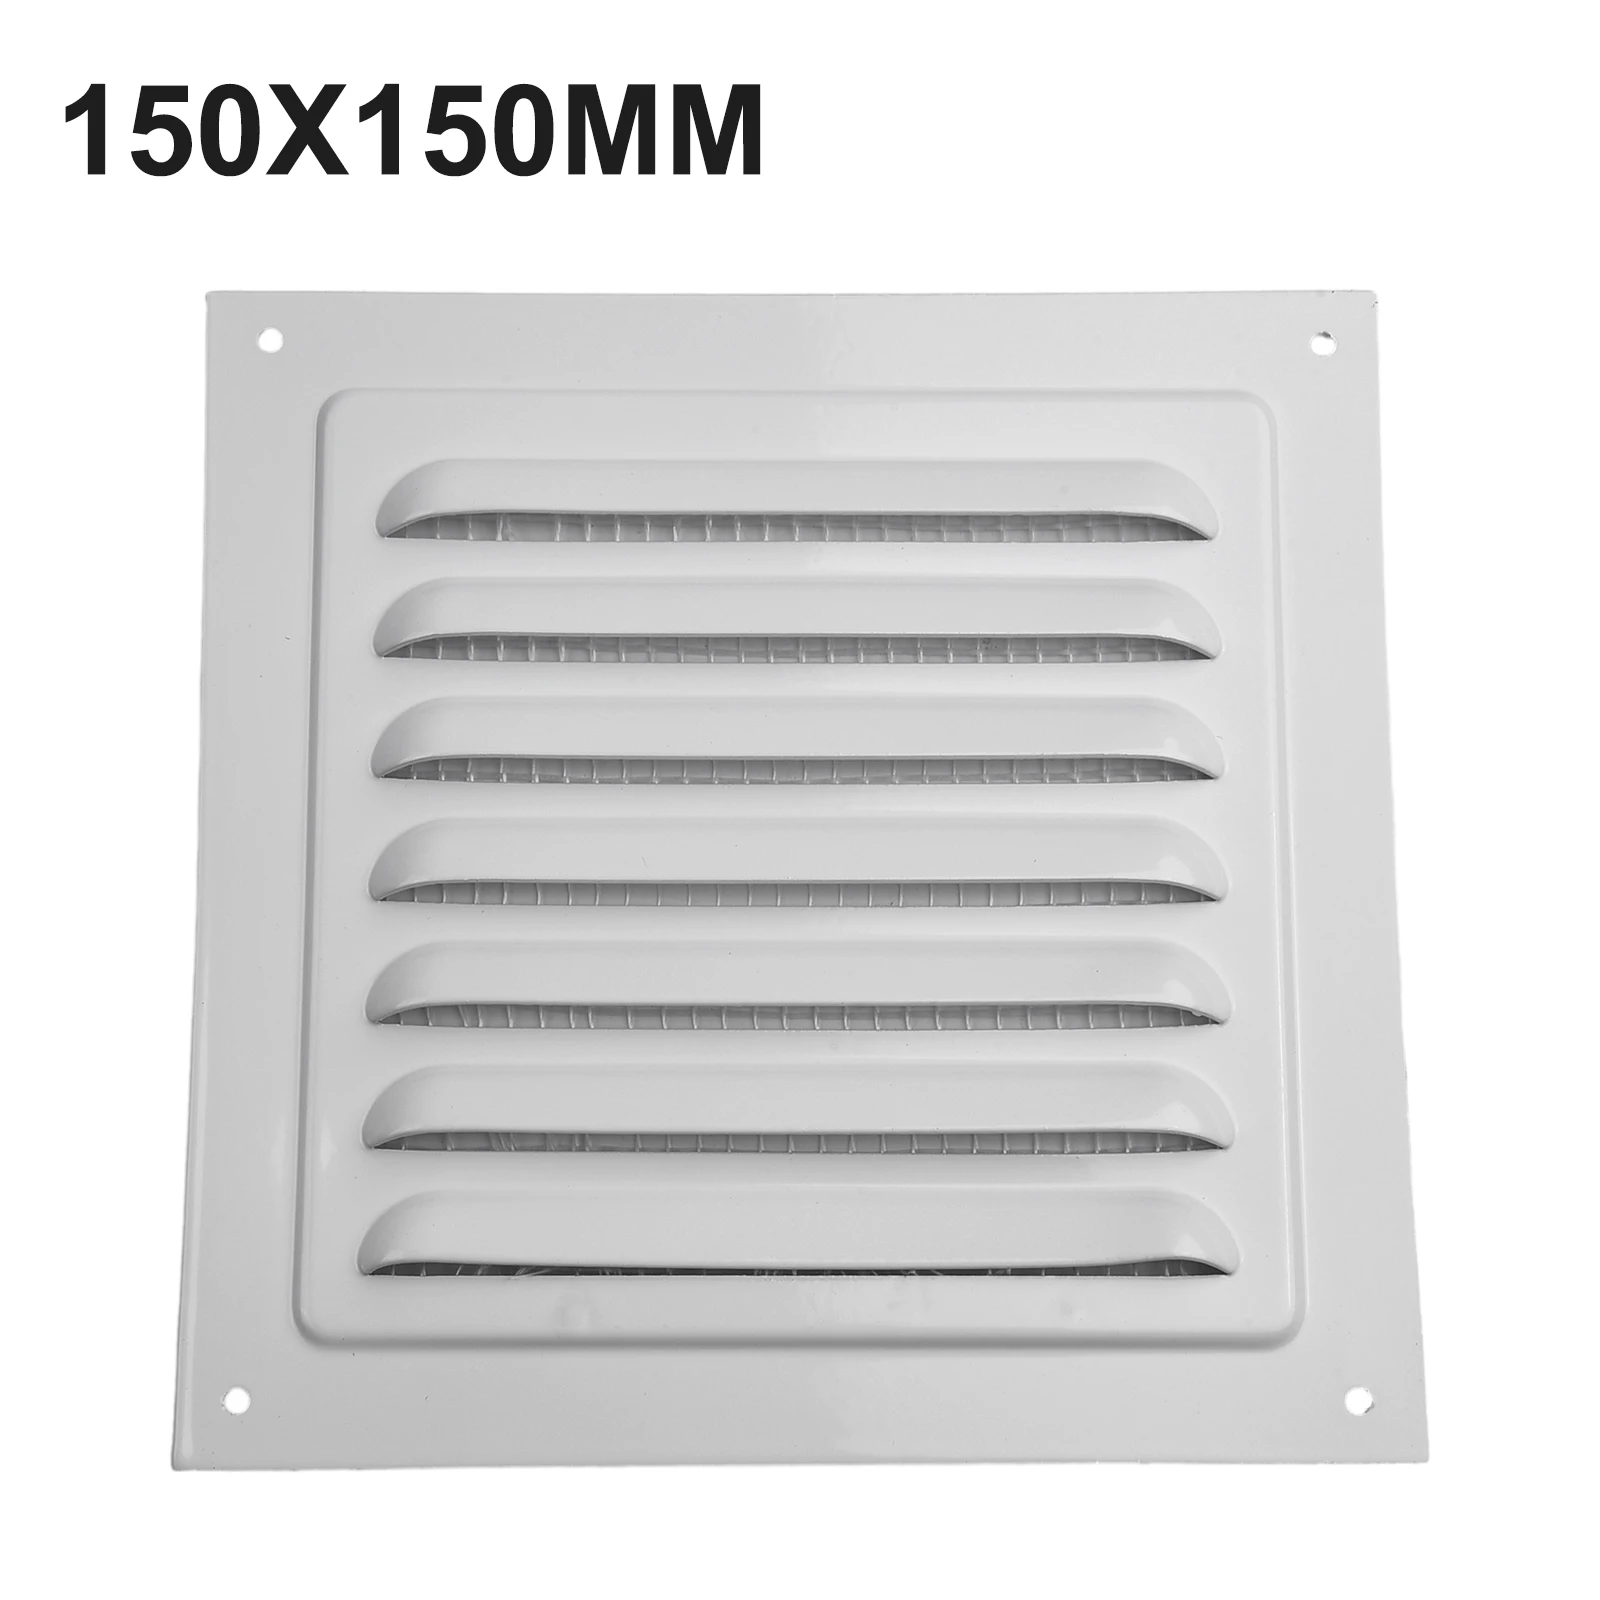 

1pc Aluminum Metal Louver Vent Grille Cover Square Vent Insect Screen Cover For Covering Wall Ceiling Openings Duct Vents